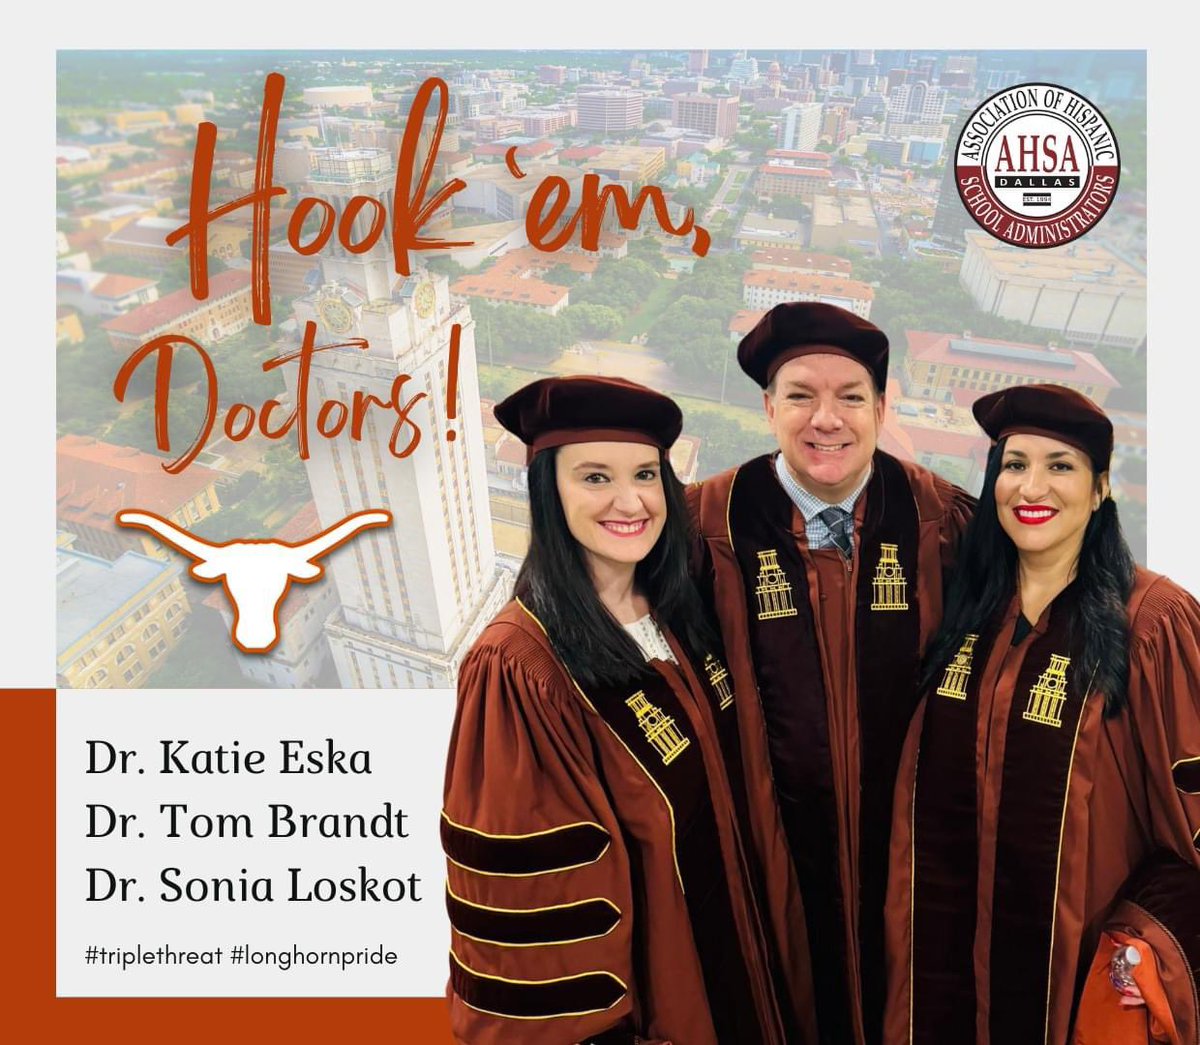 Congrats to these three leaders for achieving an amazing milestone. Executive Directors Dr. Katie Eska, Dr. Tom Brandt, and Dr. Sonia Loskot, all graduated with a doctoral degree from The University of Texas at Austin. Hook 'em! #LonghornPride #stampedecoming